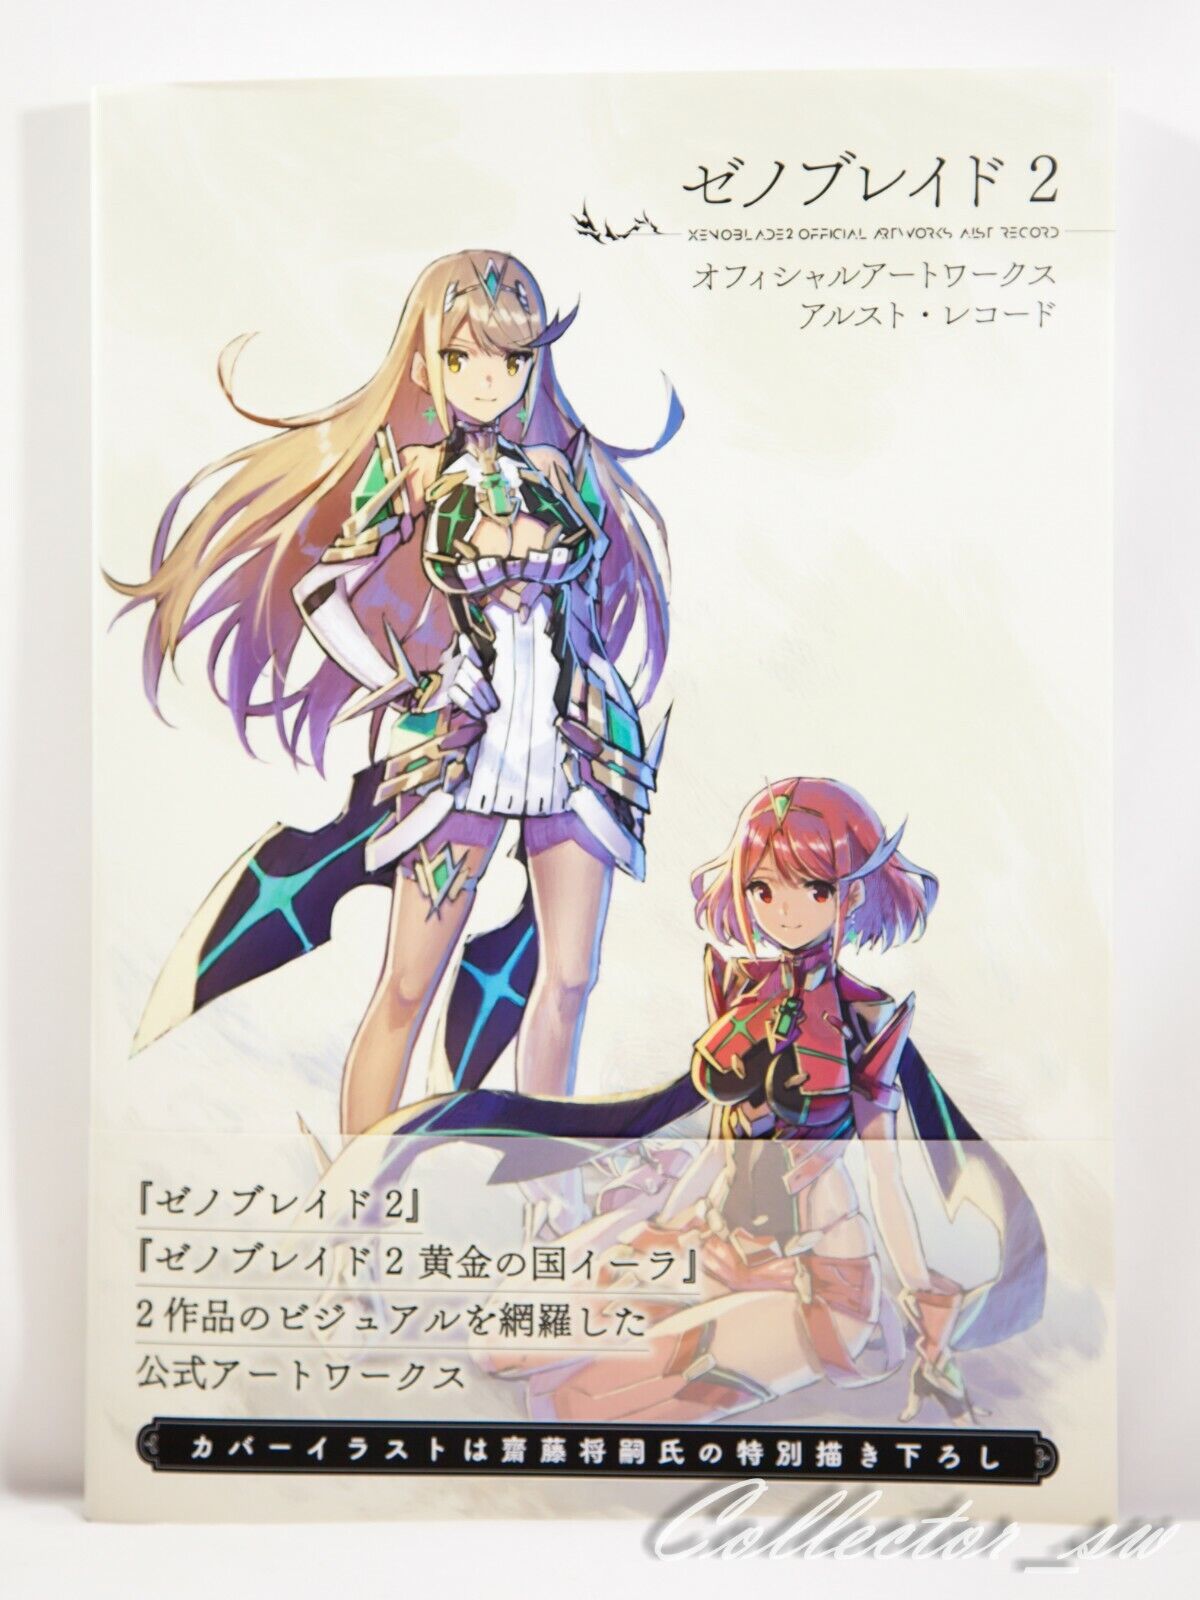 Xenoblade 2 Official Artworks Alest Record (FedEx/DHL)